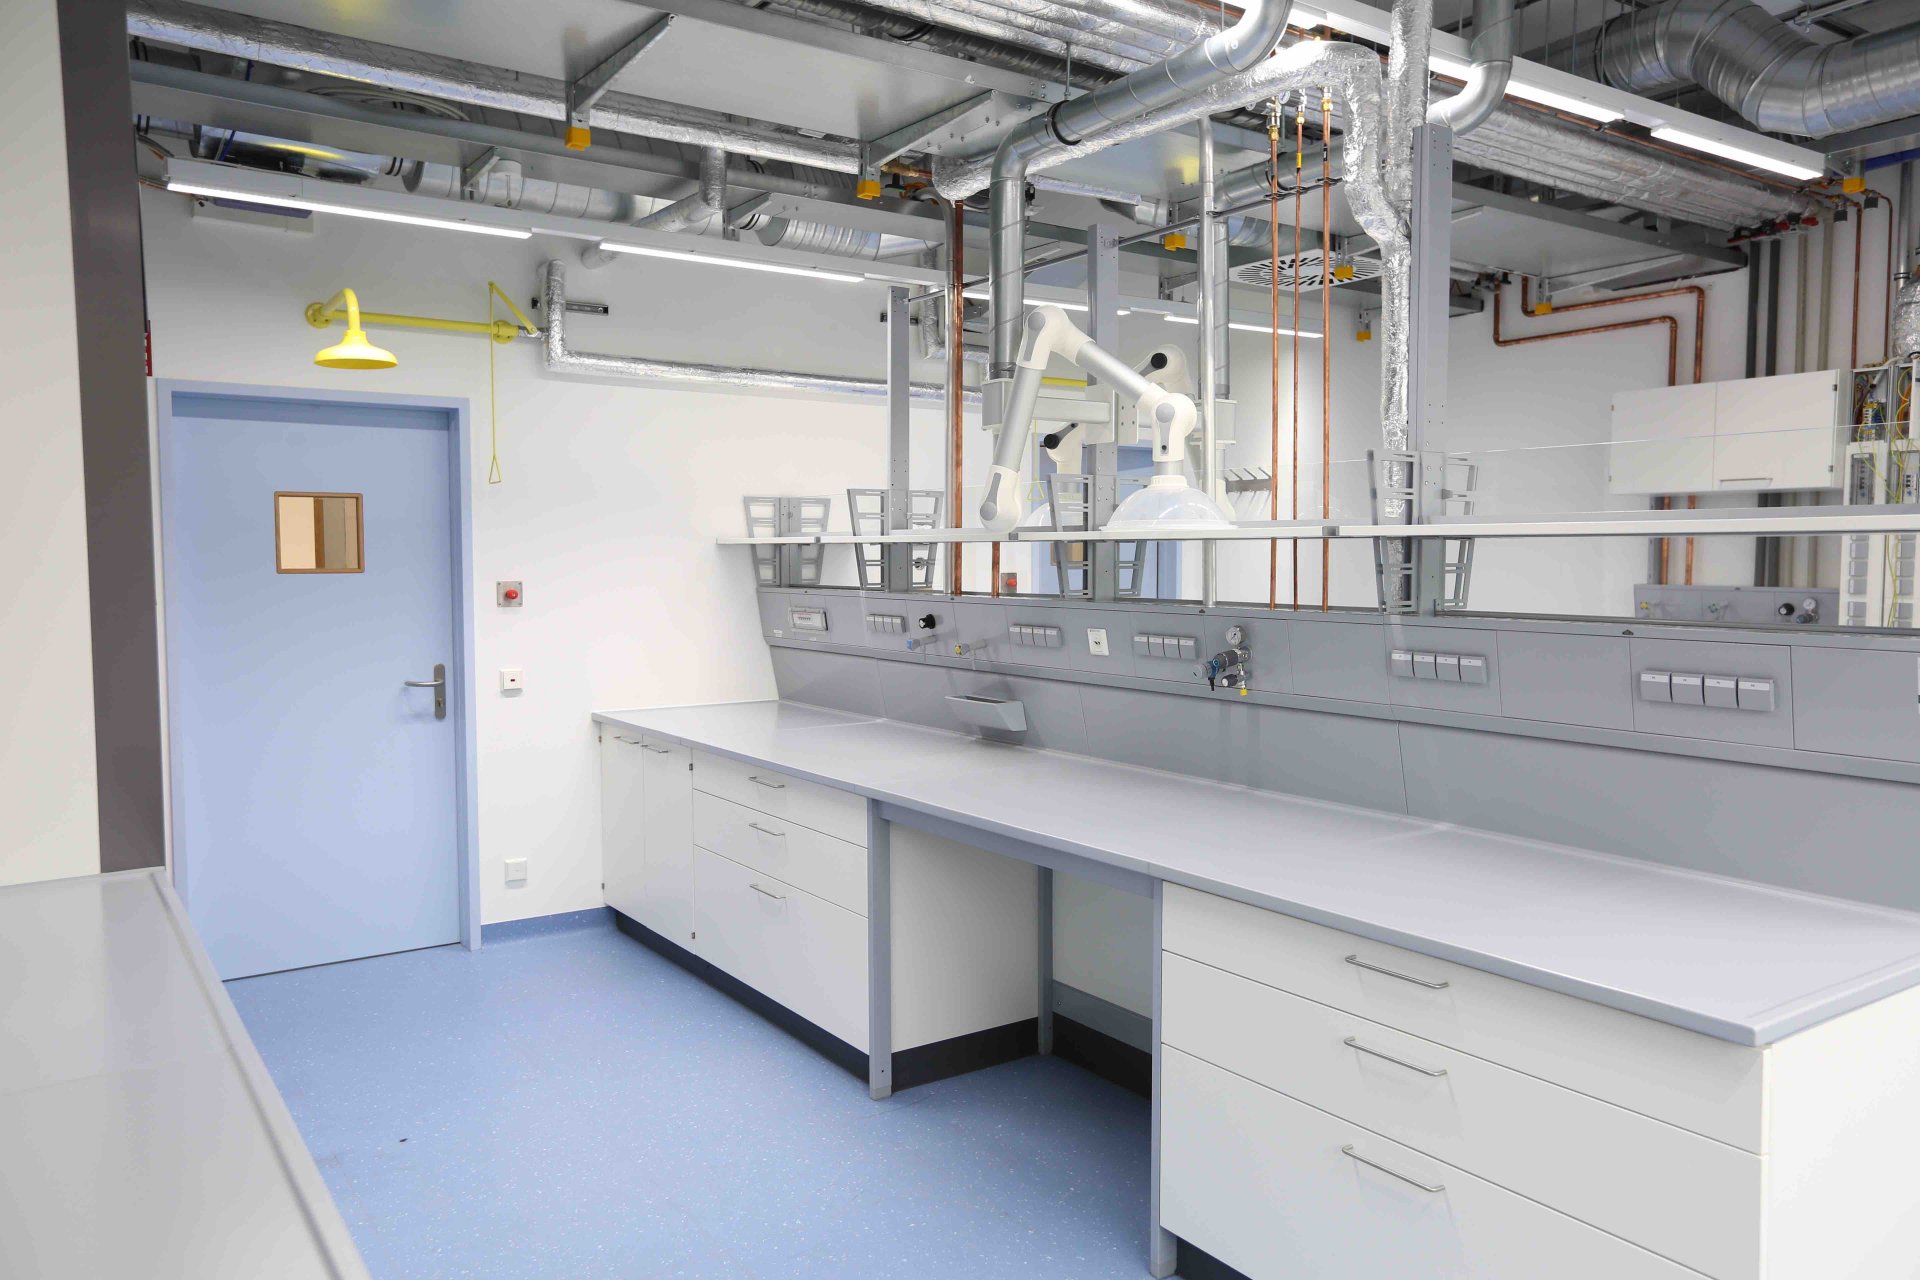 Laboratory in the new building. (© Max Planck Institut for Marine Microbiology, K. Matthes)